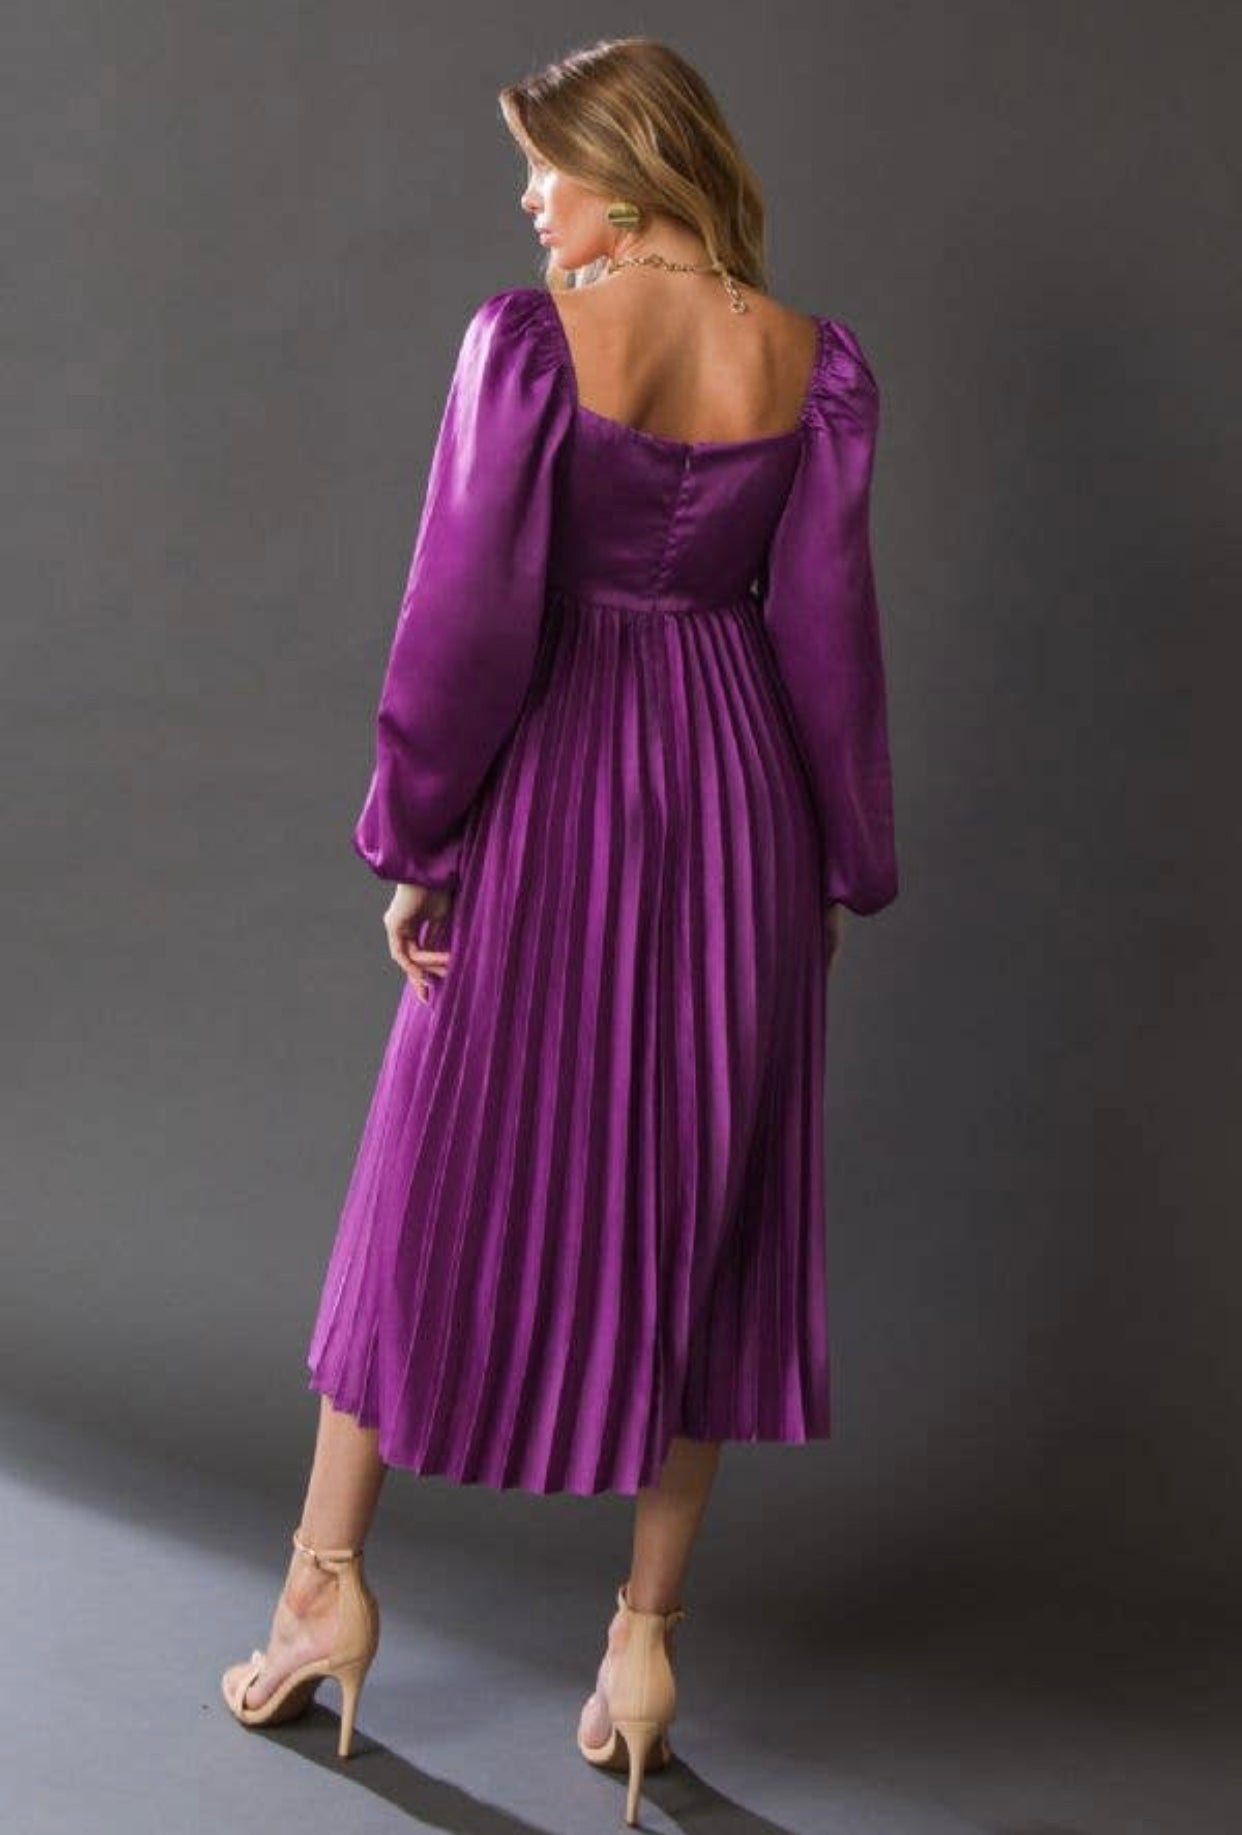 Dark Orchid Satin Bishop Sleeve Dress (Sizes Small - Large)